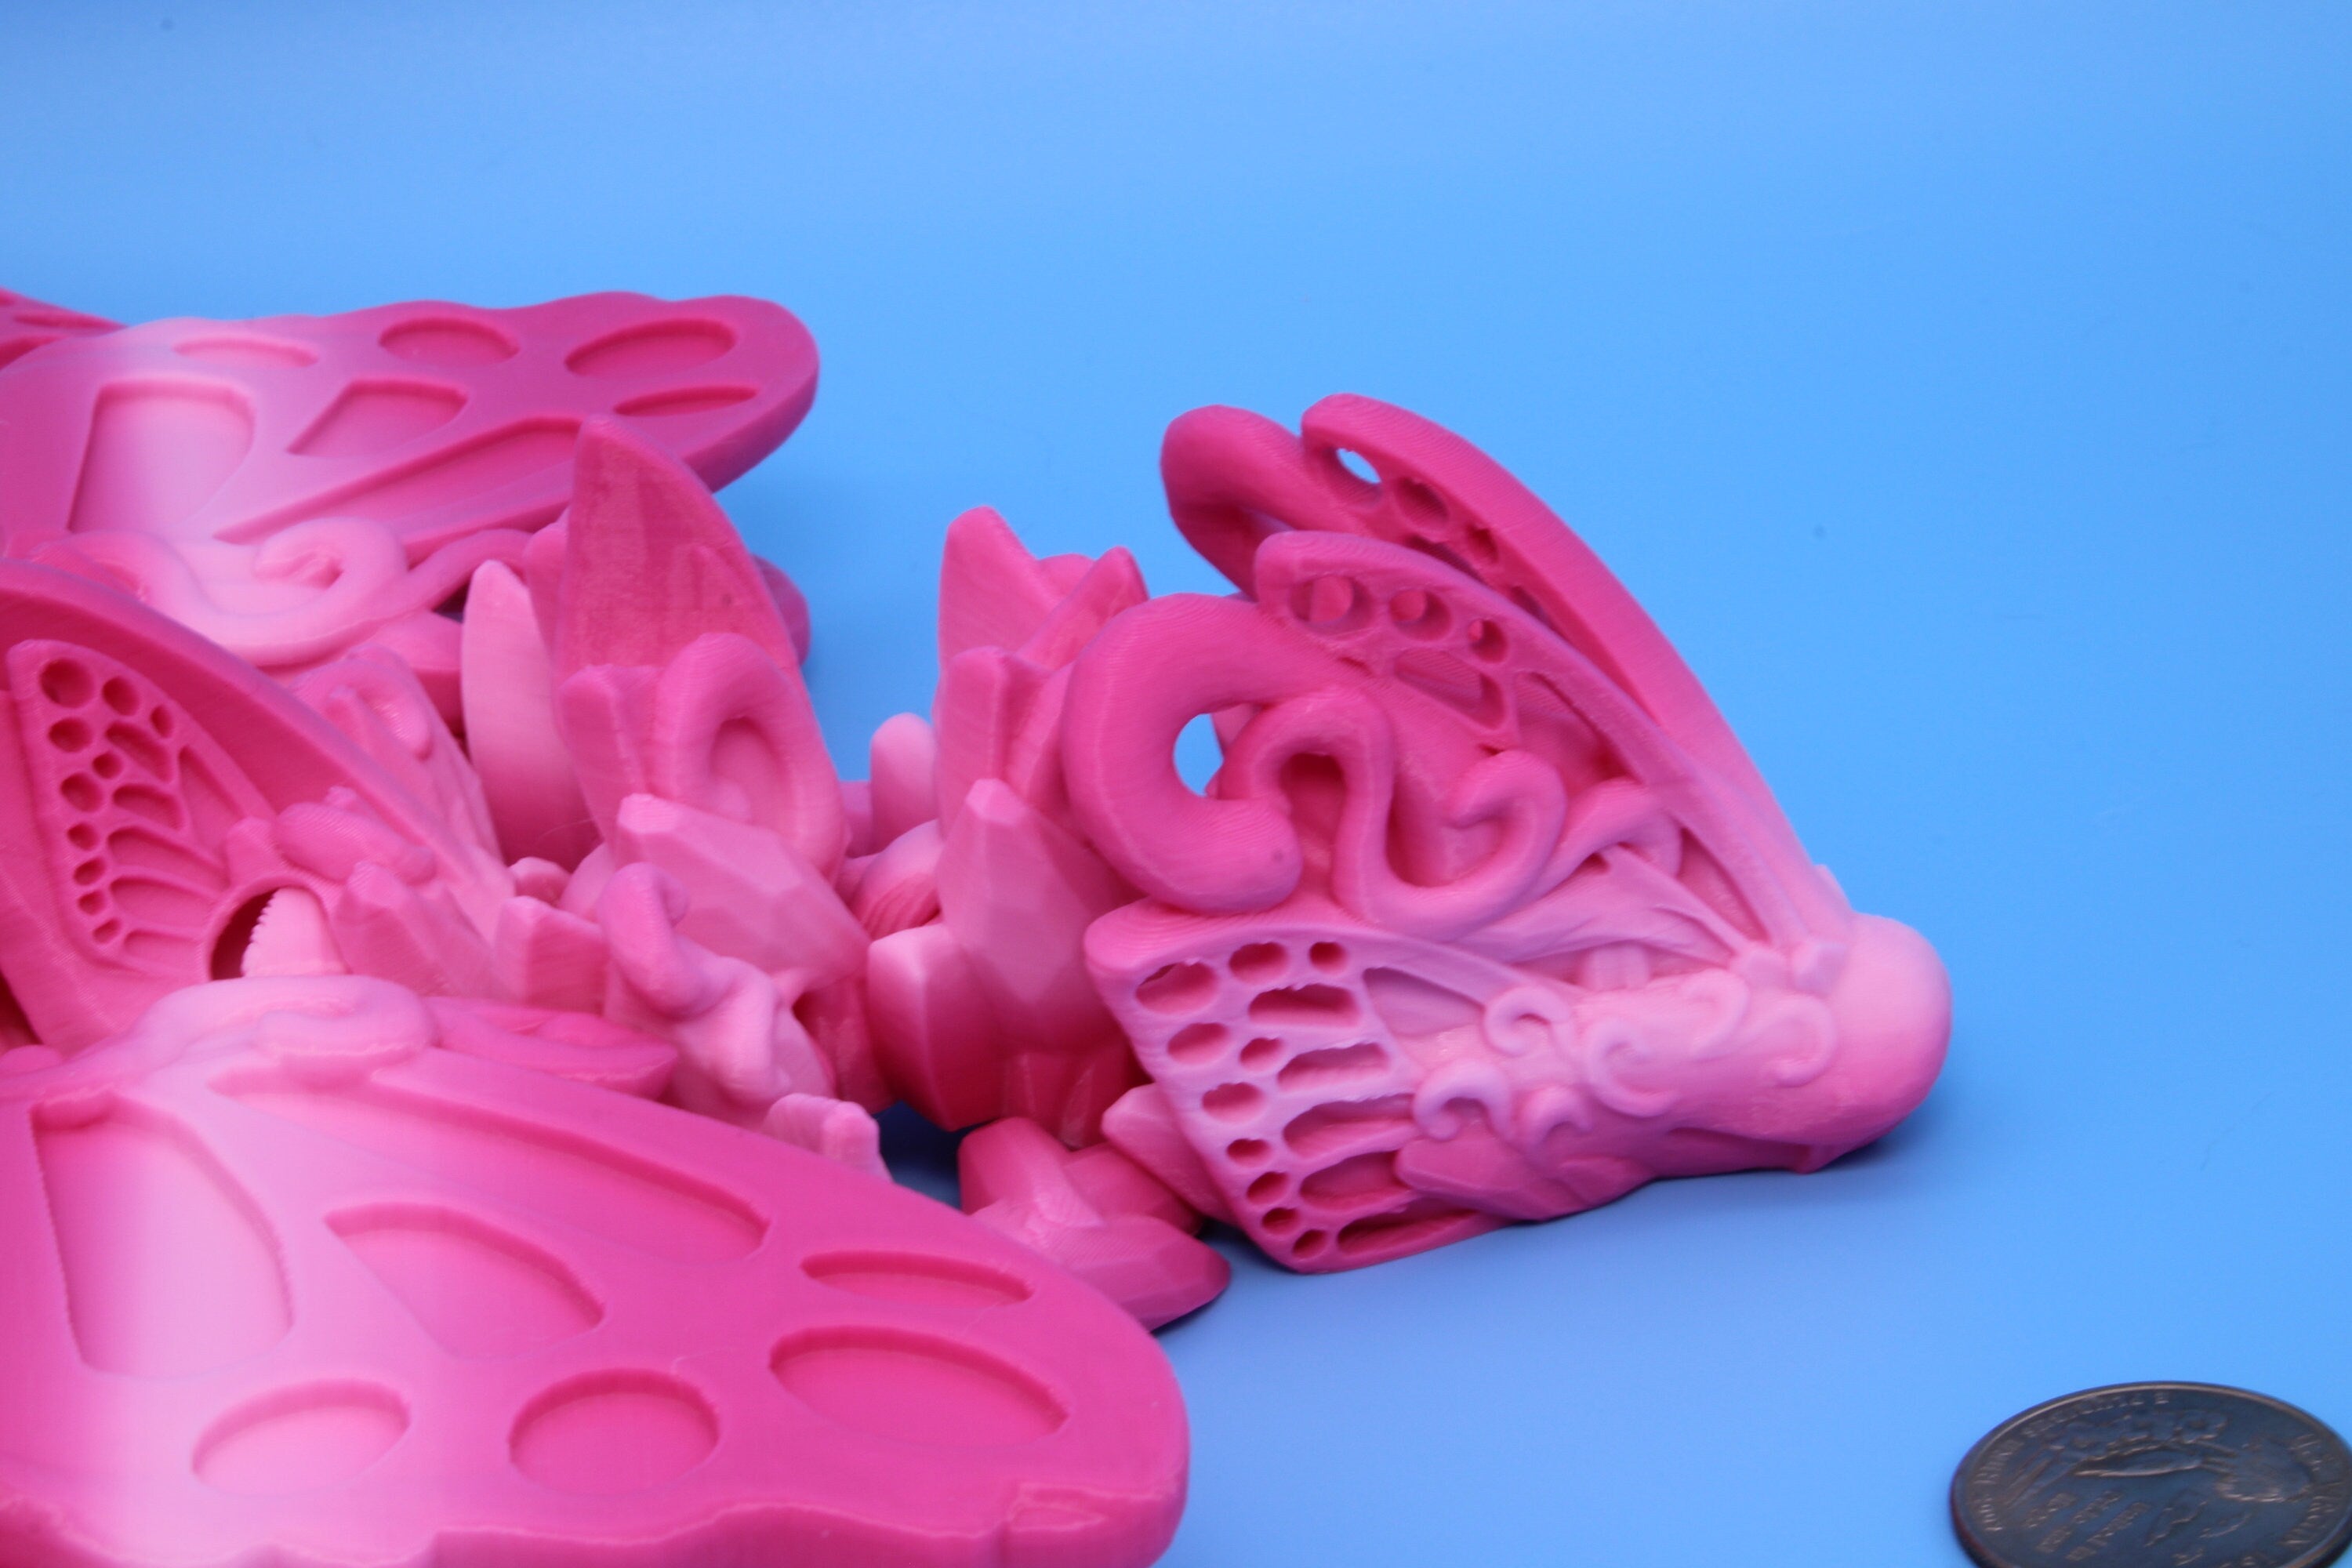 Butterfly Wing Dragon | Pink | Butterfly Wing Dragon | 3D printed | Articulating Dragon | Fidget Toy | Flexi Toy | 18 in